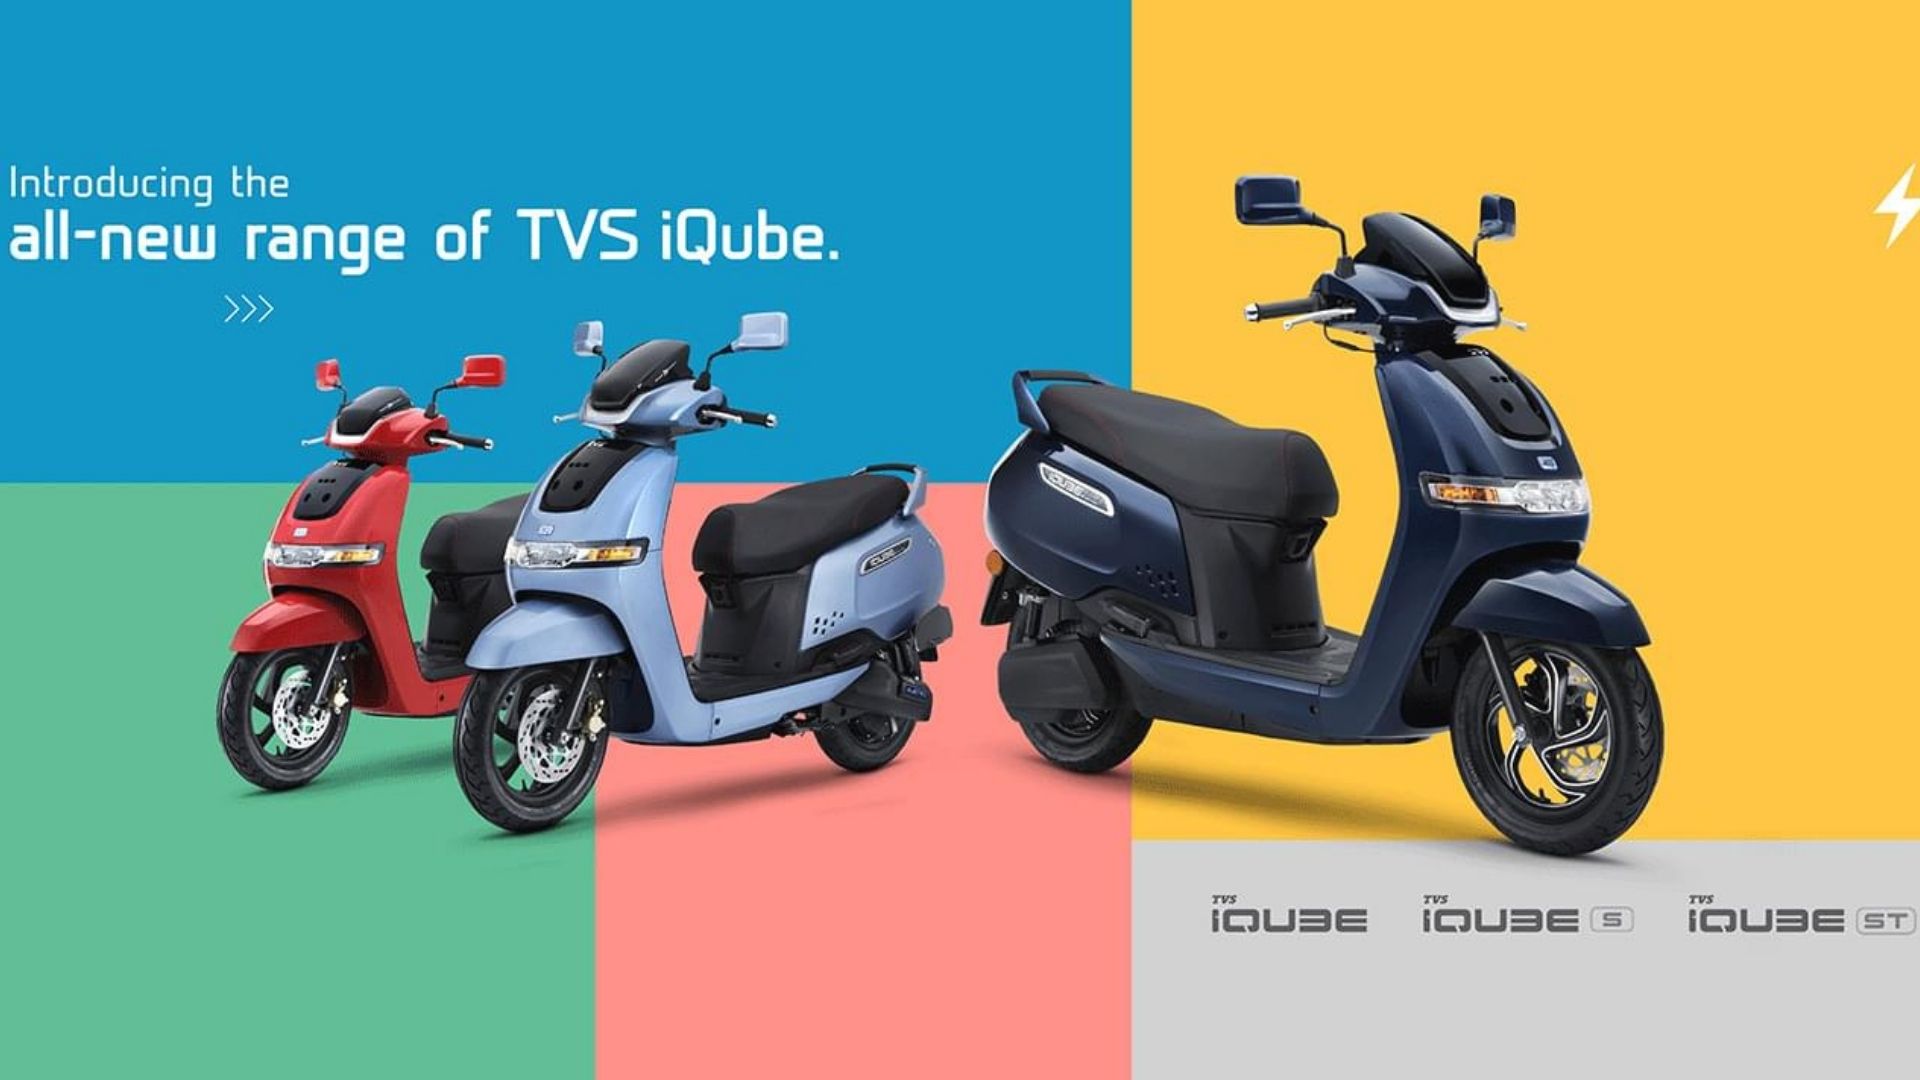 TVS launched three Variants of Electric Scooter IQube, IQube S, & IQube ST